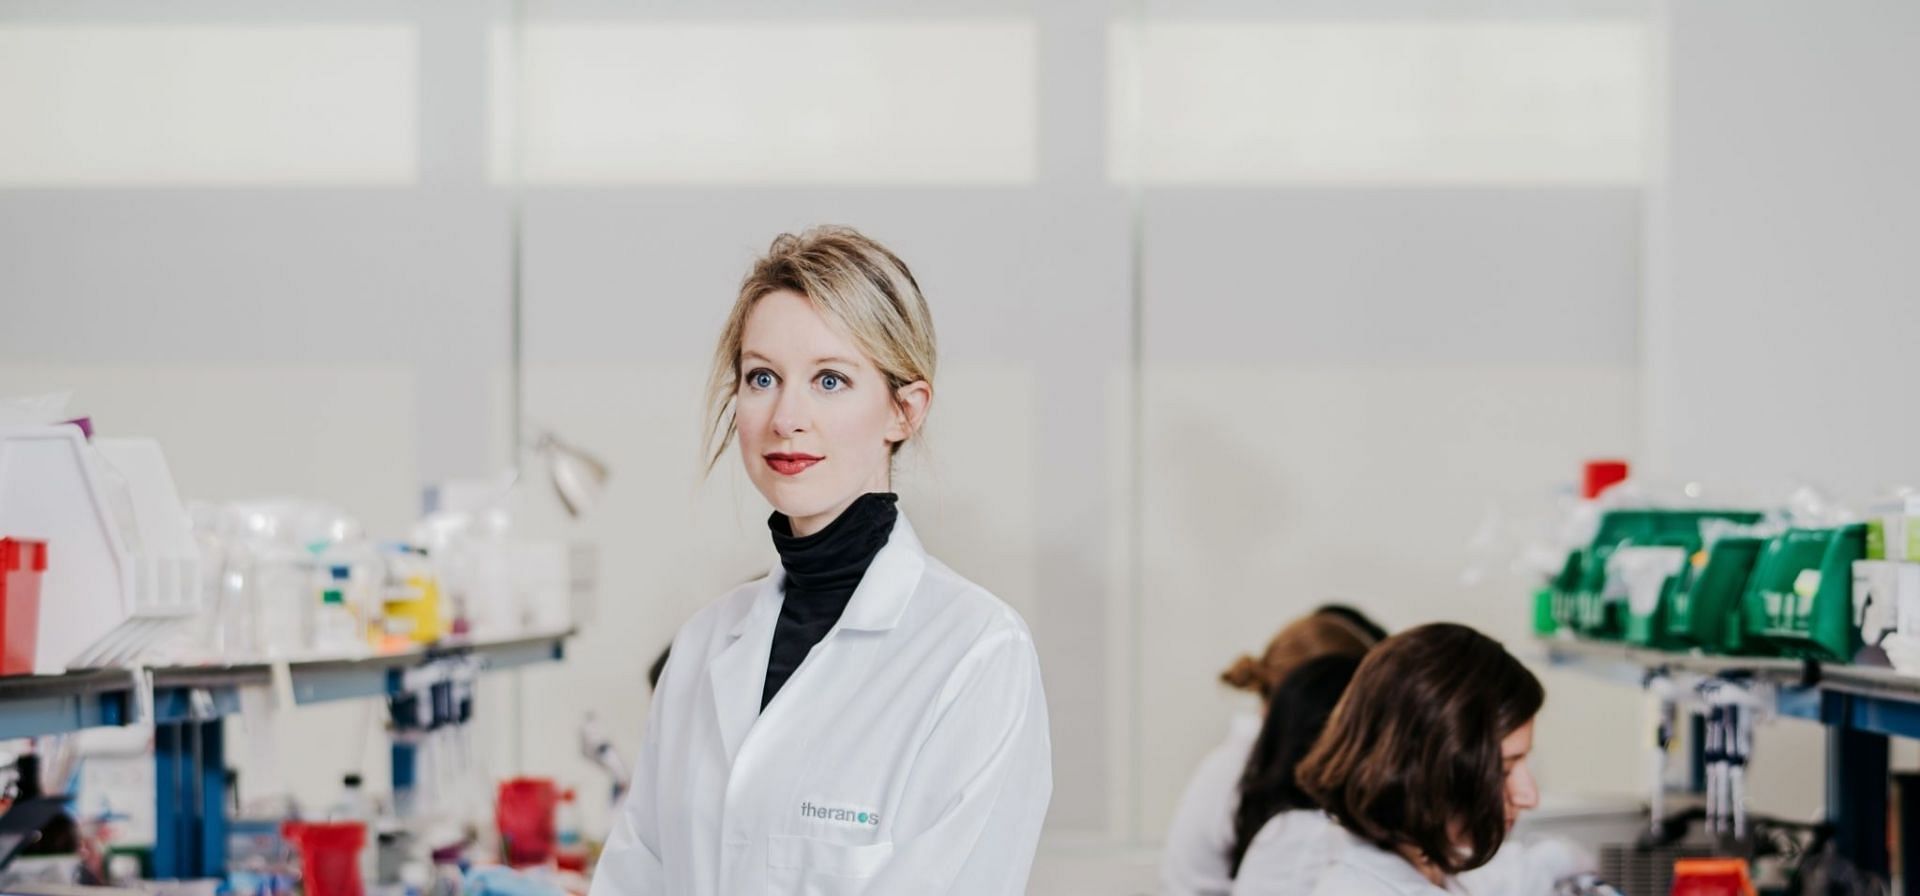 Elizabeth Holmes established Theranos when she was just 19 years old (Image via Benjamin Rasmussen/Getty Images)